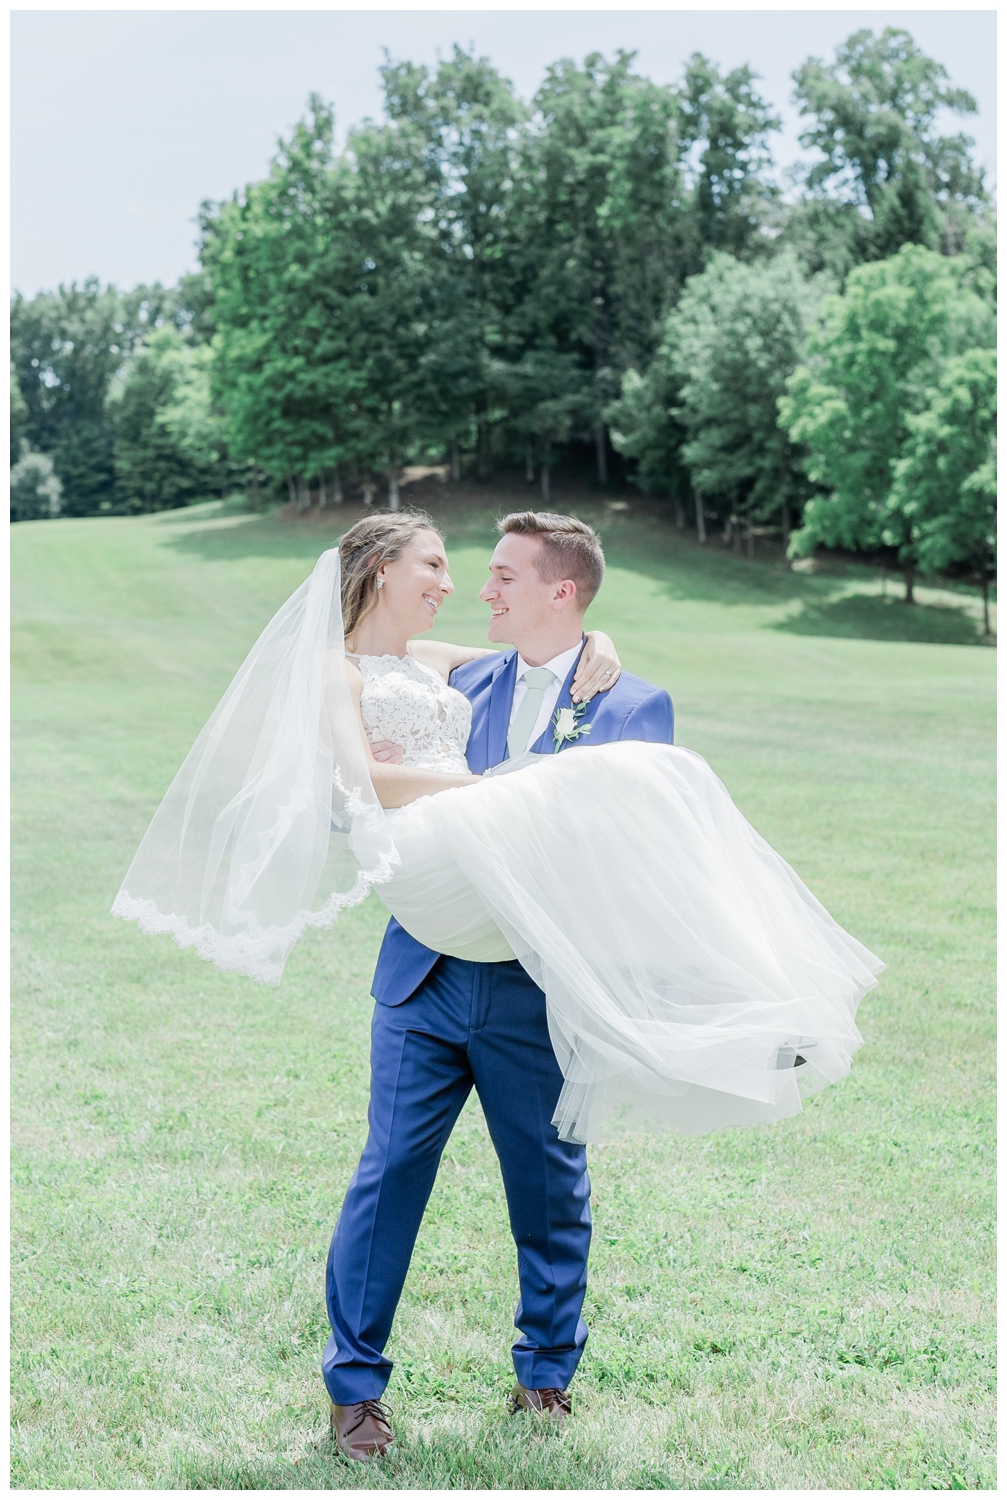 Wedding photo of a couple in a field at Hayloft at the Arch. Groom is wearing a navy blue suit and the bride is wearing a high neckline wedding dress with lots of tulle and a vail.